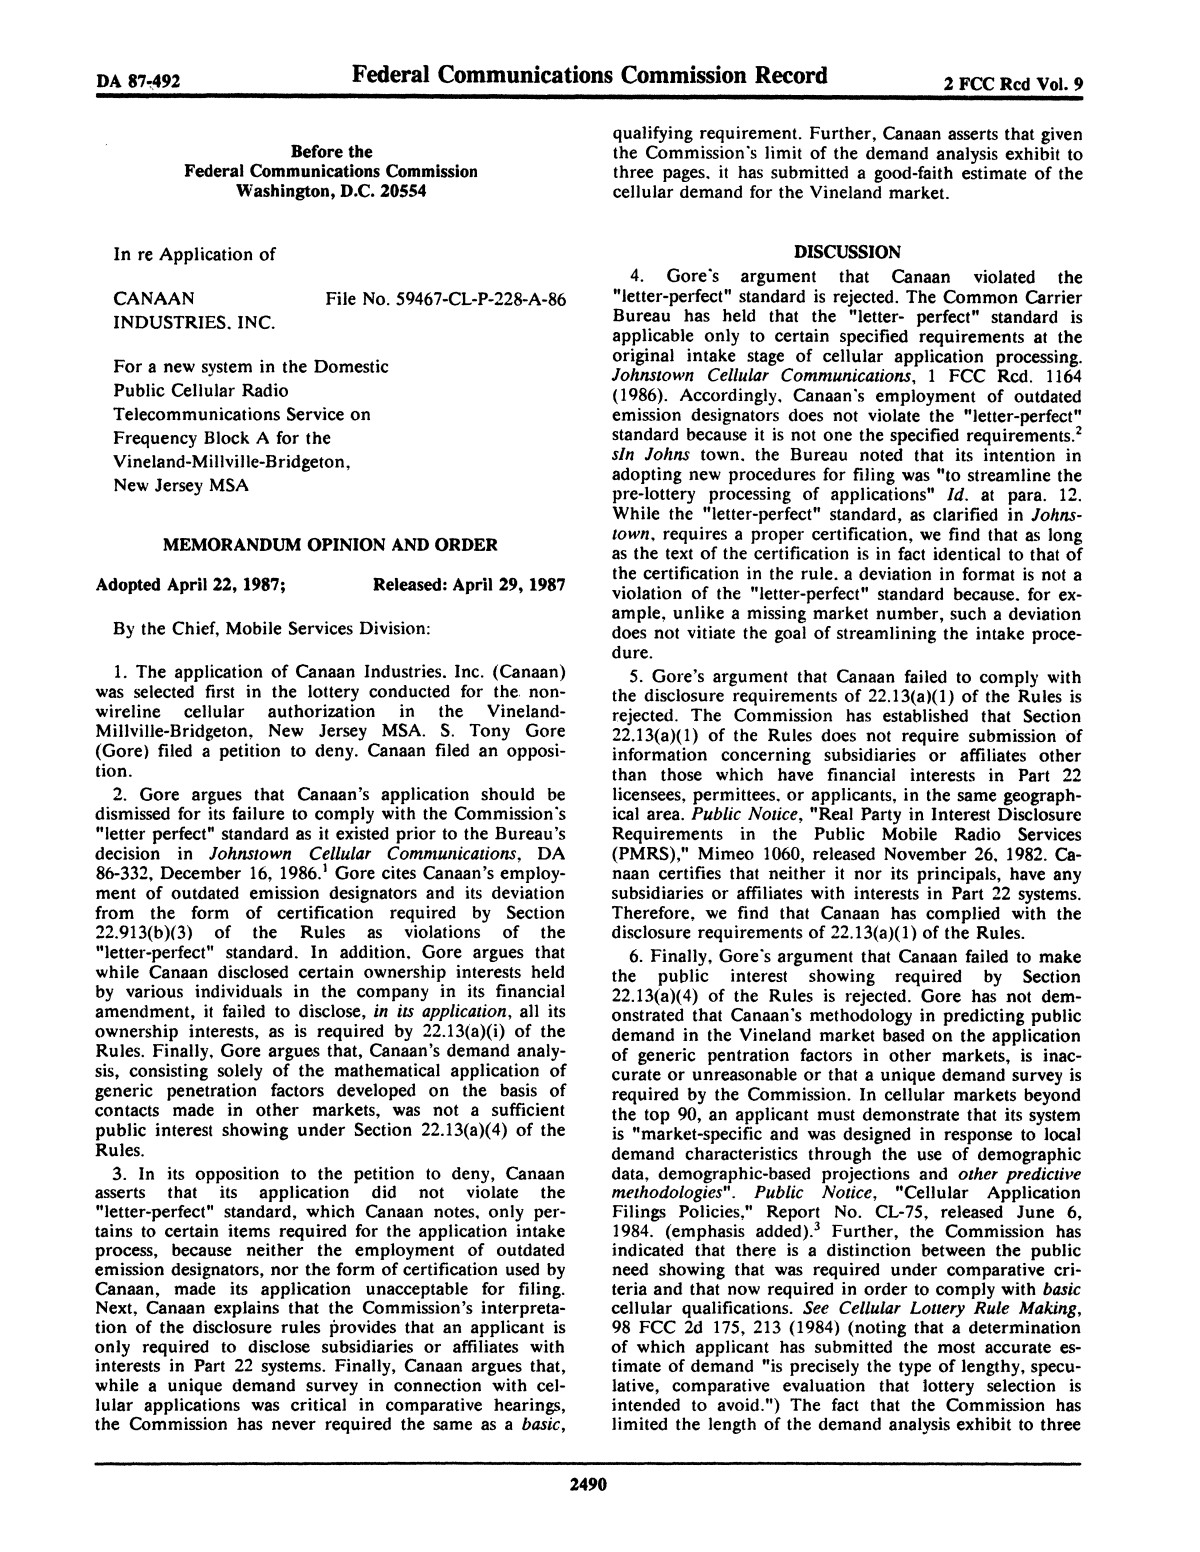 FCC Record, Volume 2, No. 9, Pages 2437 to 2750, April 27 - May 8, 1987
                                                
                                                    2490
                                                